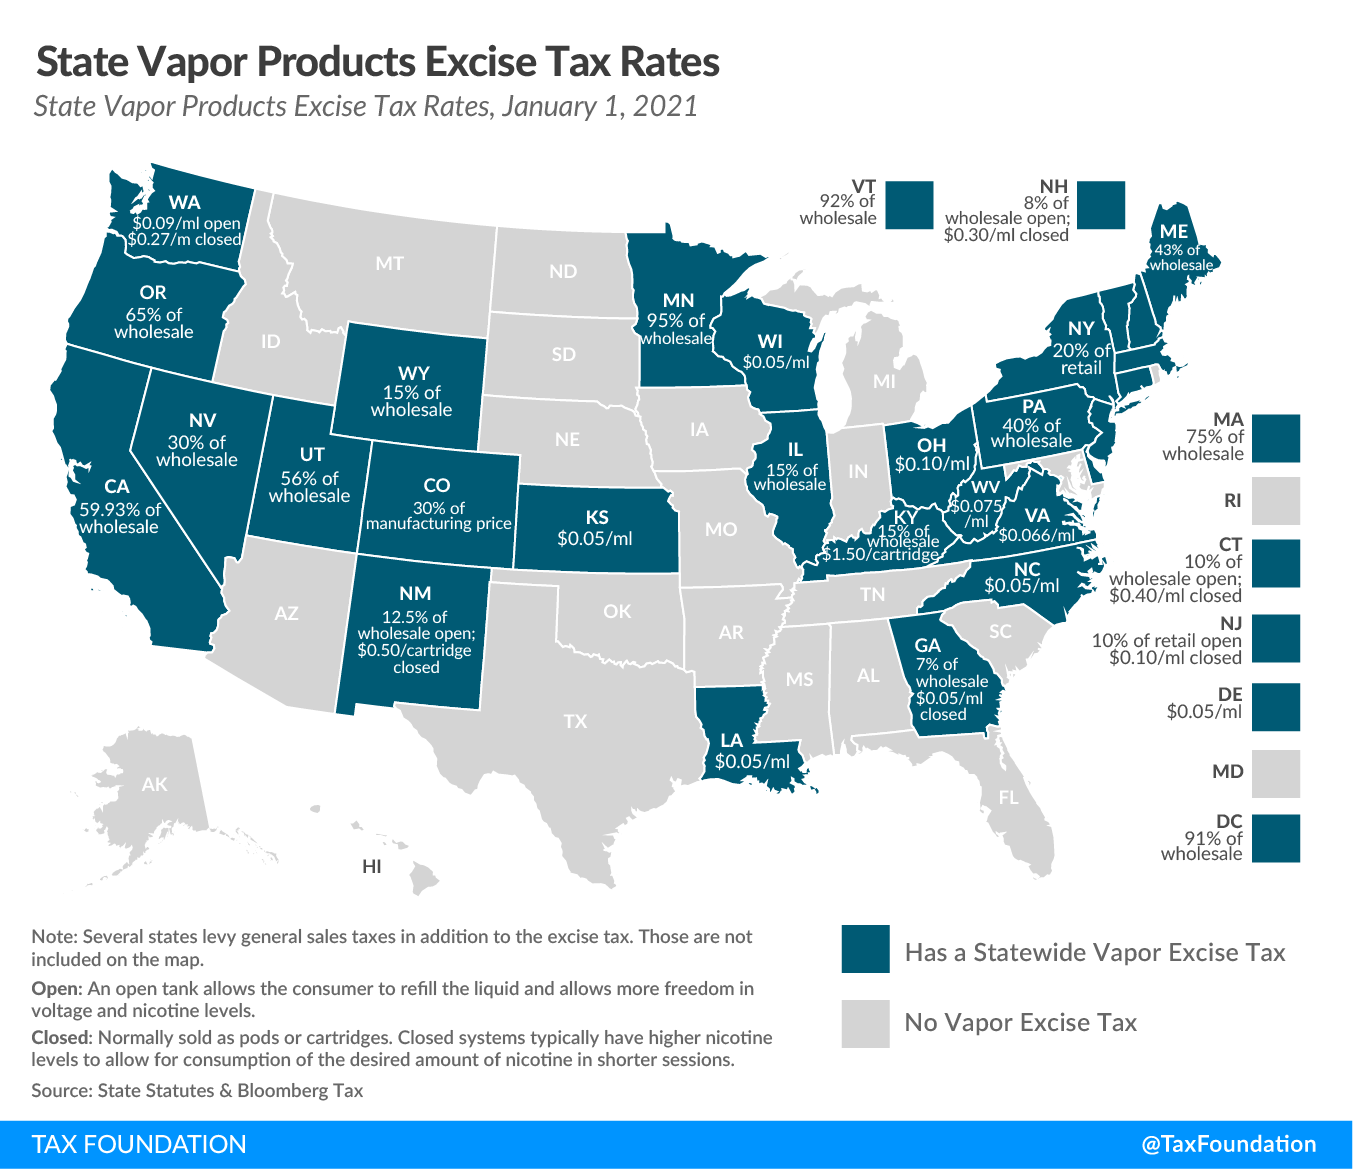 2021 state vaping tax rates, 2021 state taxes on vaping, 2021 state vape tax rates, 2021 excise taxes and 2021 excise tax trends